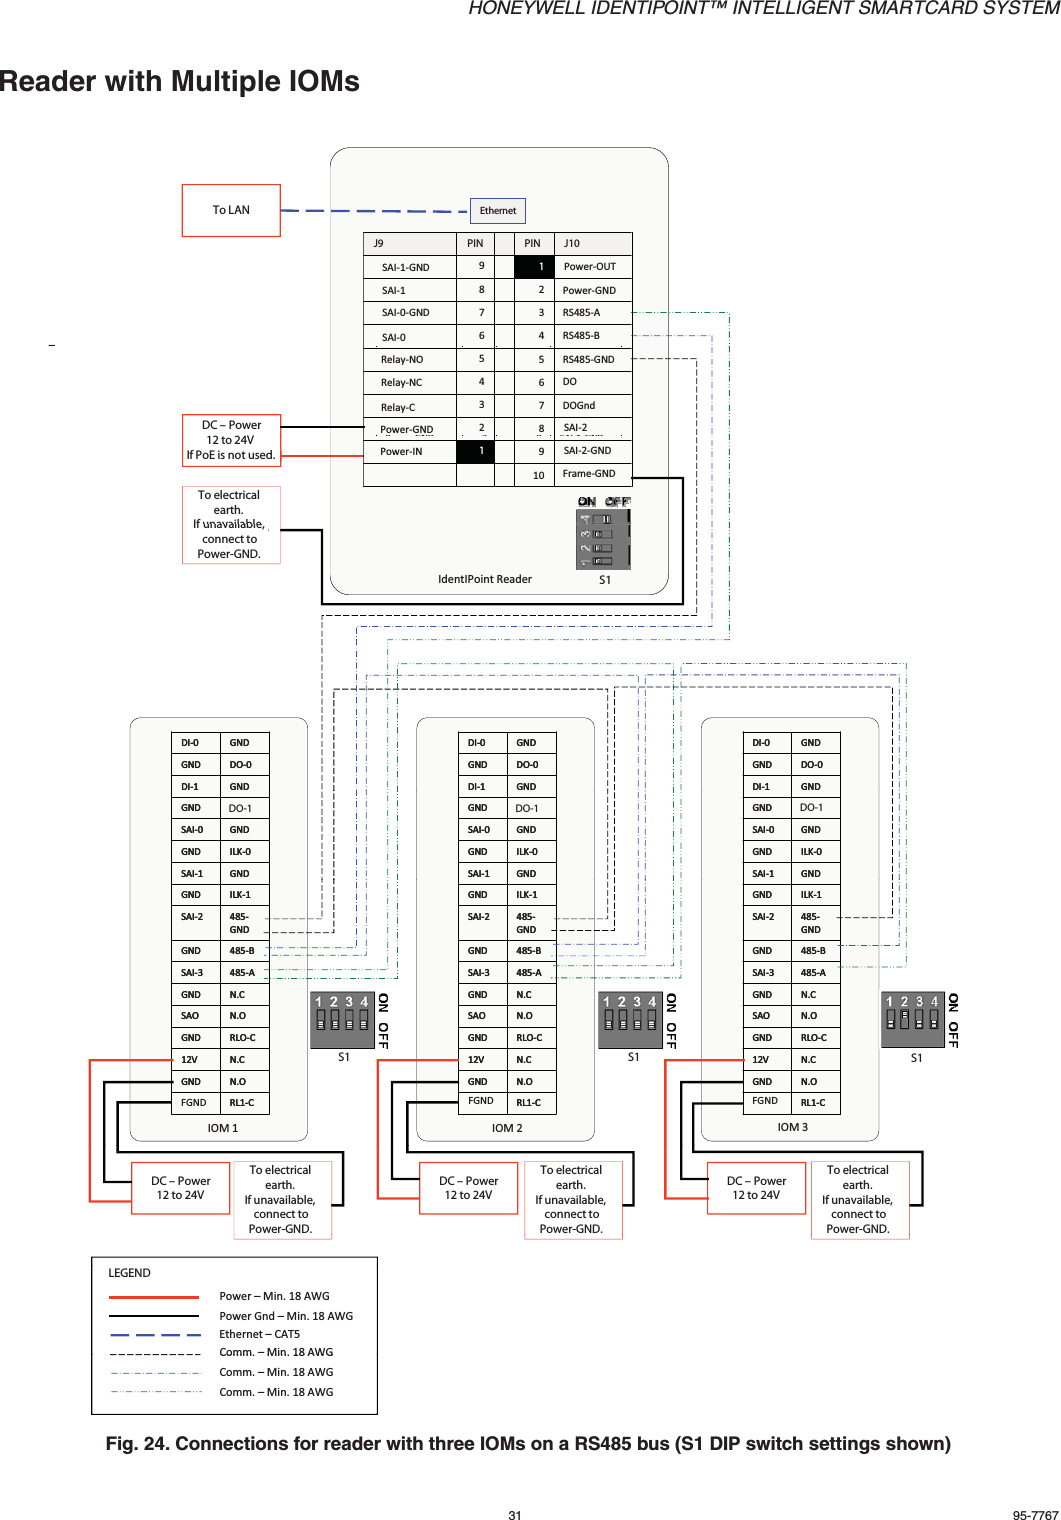 HONEYWELL IDENTIPOINT™ INTELLIGENT SMARTCARD SYSTEM31 95-7767Reader with Multiple IOMsFig. 24. Connections for reader with three IOMs on a RS485 bus (S1 DIP switch settings shown)J9PINPINJ10EthernetJ9PINPINJ10EthernetJ10PINPINJ9To LANRelay-NC47DOGndRelay-C38SAI-2Power-GND29SAI-2-GNDPower-IN110Frame-GNDRelay-NC47DOGndRelay-C38SAI-2Power-GND29SAI-2-GNDPower-IN110Frame-GNDPower-OUTSAI-1-GNDPower-GNDSAI-1RS485-ASAI-0-GNDRS485-BSAI-0 64738291–DC – PowerSAI1GND92PGNDSAI-183RS485-ASAI-0-GND74RS485-BSAI-065RS485-GNDRelay-NO56DOSAI1GND92PGNDSAI-183RS485-ASAI-0-GND74RS485-BSAI-065RS485-GNDRelay-NO56DO2837465RS485-GND5ON-yaleRDORelay-NCDOGndRelay-CSAI-2Power-GND 12 to 24VIf PoE is not used.1Power-OUTSAI-1-GND92Power-GND12OFF  ON1Power-OUTSAI-1-GND92Power-GND12OFF  ON19SAI-2-GNDPower-INFrame-GND10To electrical earth.                    If unavailableS1234BOTAC readerS1234BOTAC readerIdentIPoint Reader S1If unavailable, connect to Power-GND.GNDDI-1DO-0GNDGNDDI-0GNDDI-1DO-0GNDGNDDI-0GNDDI-1DO-0GNDGNDDI-0GNDDI-1DO-0GNDGNDDI-0GNDDI-1DO-0GNDGNDDI-0GNDDI-1DO-0GNDGNDDI-0GNDSAI-1ILK-0GNDGNDSAI-0D1-0GNDGNDSAI-1ILK-0GNDGNDSAI-0D1-0GNDGNDSAI-1ILK-0GNDGNDSAI-0D1-0GNDGNDSAI-1ILK-0GNDGNDSAI-0D1-0GNDGNDSAI-1ILK-0GNDGNDSAI-0D1-0GNDGNDSAI-1ILK-0GNDGNDSAI-0D1-0GNDDO-1 DO-1 DO-1485-BGND485-GNDSAI-2ILK-1GND485-BGND485-GNDSAI-2ILK-1GND485-BGND485-GNDSAI-2ILK-1GND485-BGND485-GNDSAI-2ILK-1GND485-BGND485-GNDSAI-2ILK-1GND485-BGND485-GNDSAI-2ILK-1GNDNC12VRLO-CGNDN.OSAON.CGND485-ASAI-3NC12VRLO-CGNDN.OSAON.CGND485-ASAI-3NC12VRLO-CGNDN.OSAON.CGND485-ASAI-3NC12VRLO-CGNDN.OSAON.CGND485-ASAI-3NC12VRLO-CGNDN.OSAON.CGND485-ASAI-3NC12VRLO-CGNDN.OSAON.CGND485-ASAI-3S1S1S1RL1-CN.OGNDN.C12VRL1-CN.OGNDN.C12VIO moduleRL1-CN.OGNDN.C12VRL1-CN.OGNDN.C12VIO moduleRL1-CN.OGNDN.C12VRL1-CN.OGNDN.C12VIO moduleIOM 1 IOM 2 IOM 3FGND DNGFDNGFS1S1S1DC – Power12 to 24VDC – Power12 to 24VDC – Power12 to 24VTo electrical earth.                    If unavailable, connect to Power-GND.To electrical earth.                    If unavailable, connect to Power-GND.To electrical earth.                    If unavailable, connect to Power-GND.Power – Min. 18 AWGPower Gnd – Min. 18 AWGComm–Min 18 AWGLEGENDEthernet – CAT5Comm. Min. 18 AWGComm. – Min. 18 AWGComm. – Min. 18 AWG